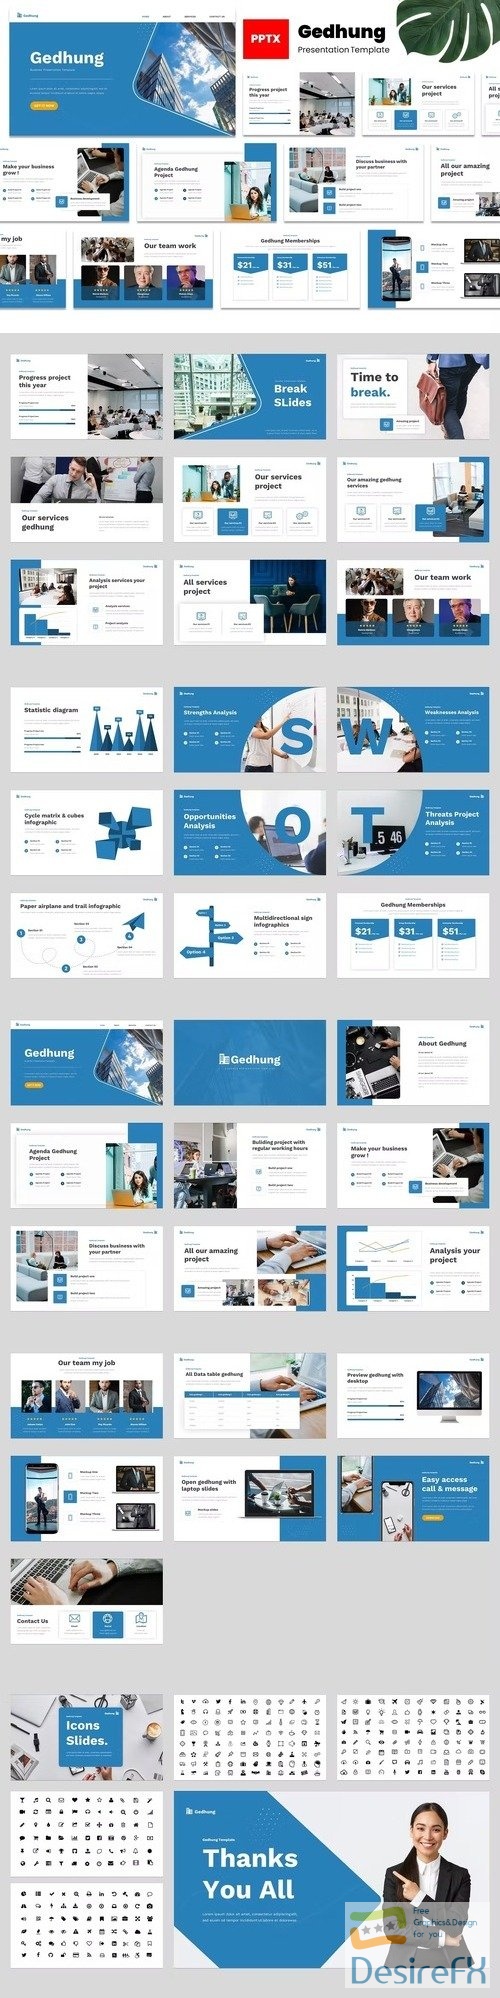 Gedhung - Business Powerpoint Template